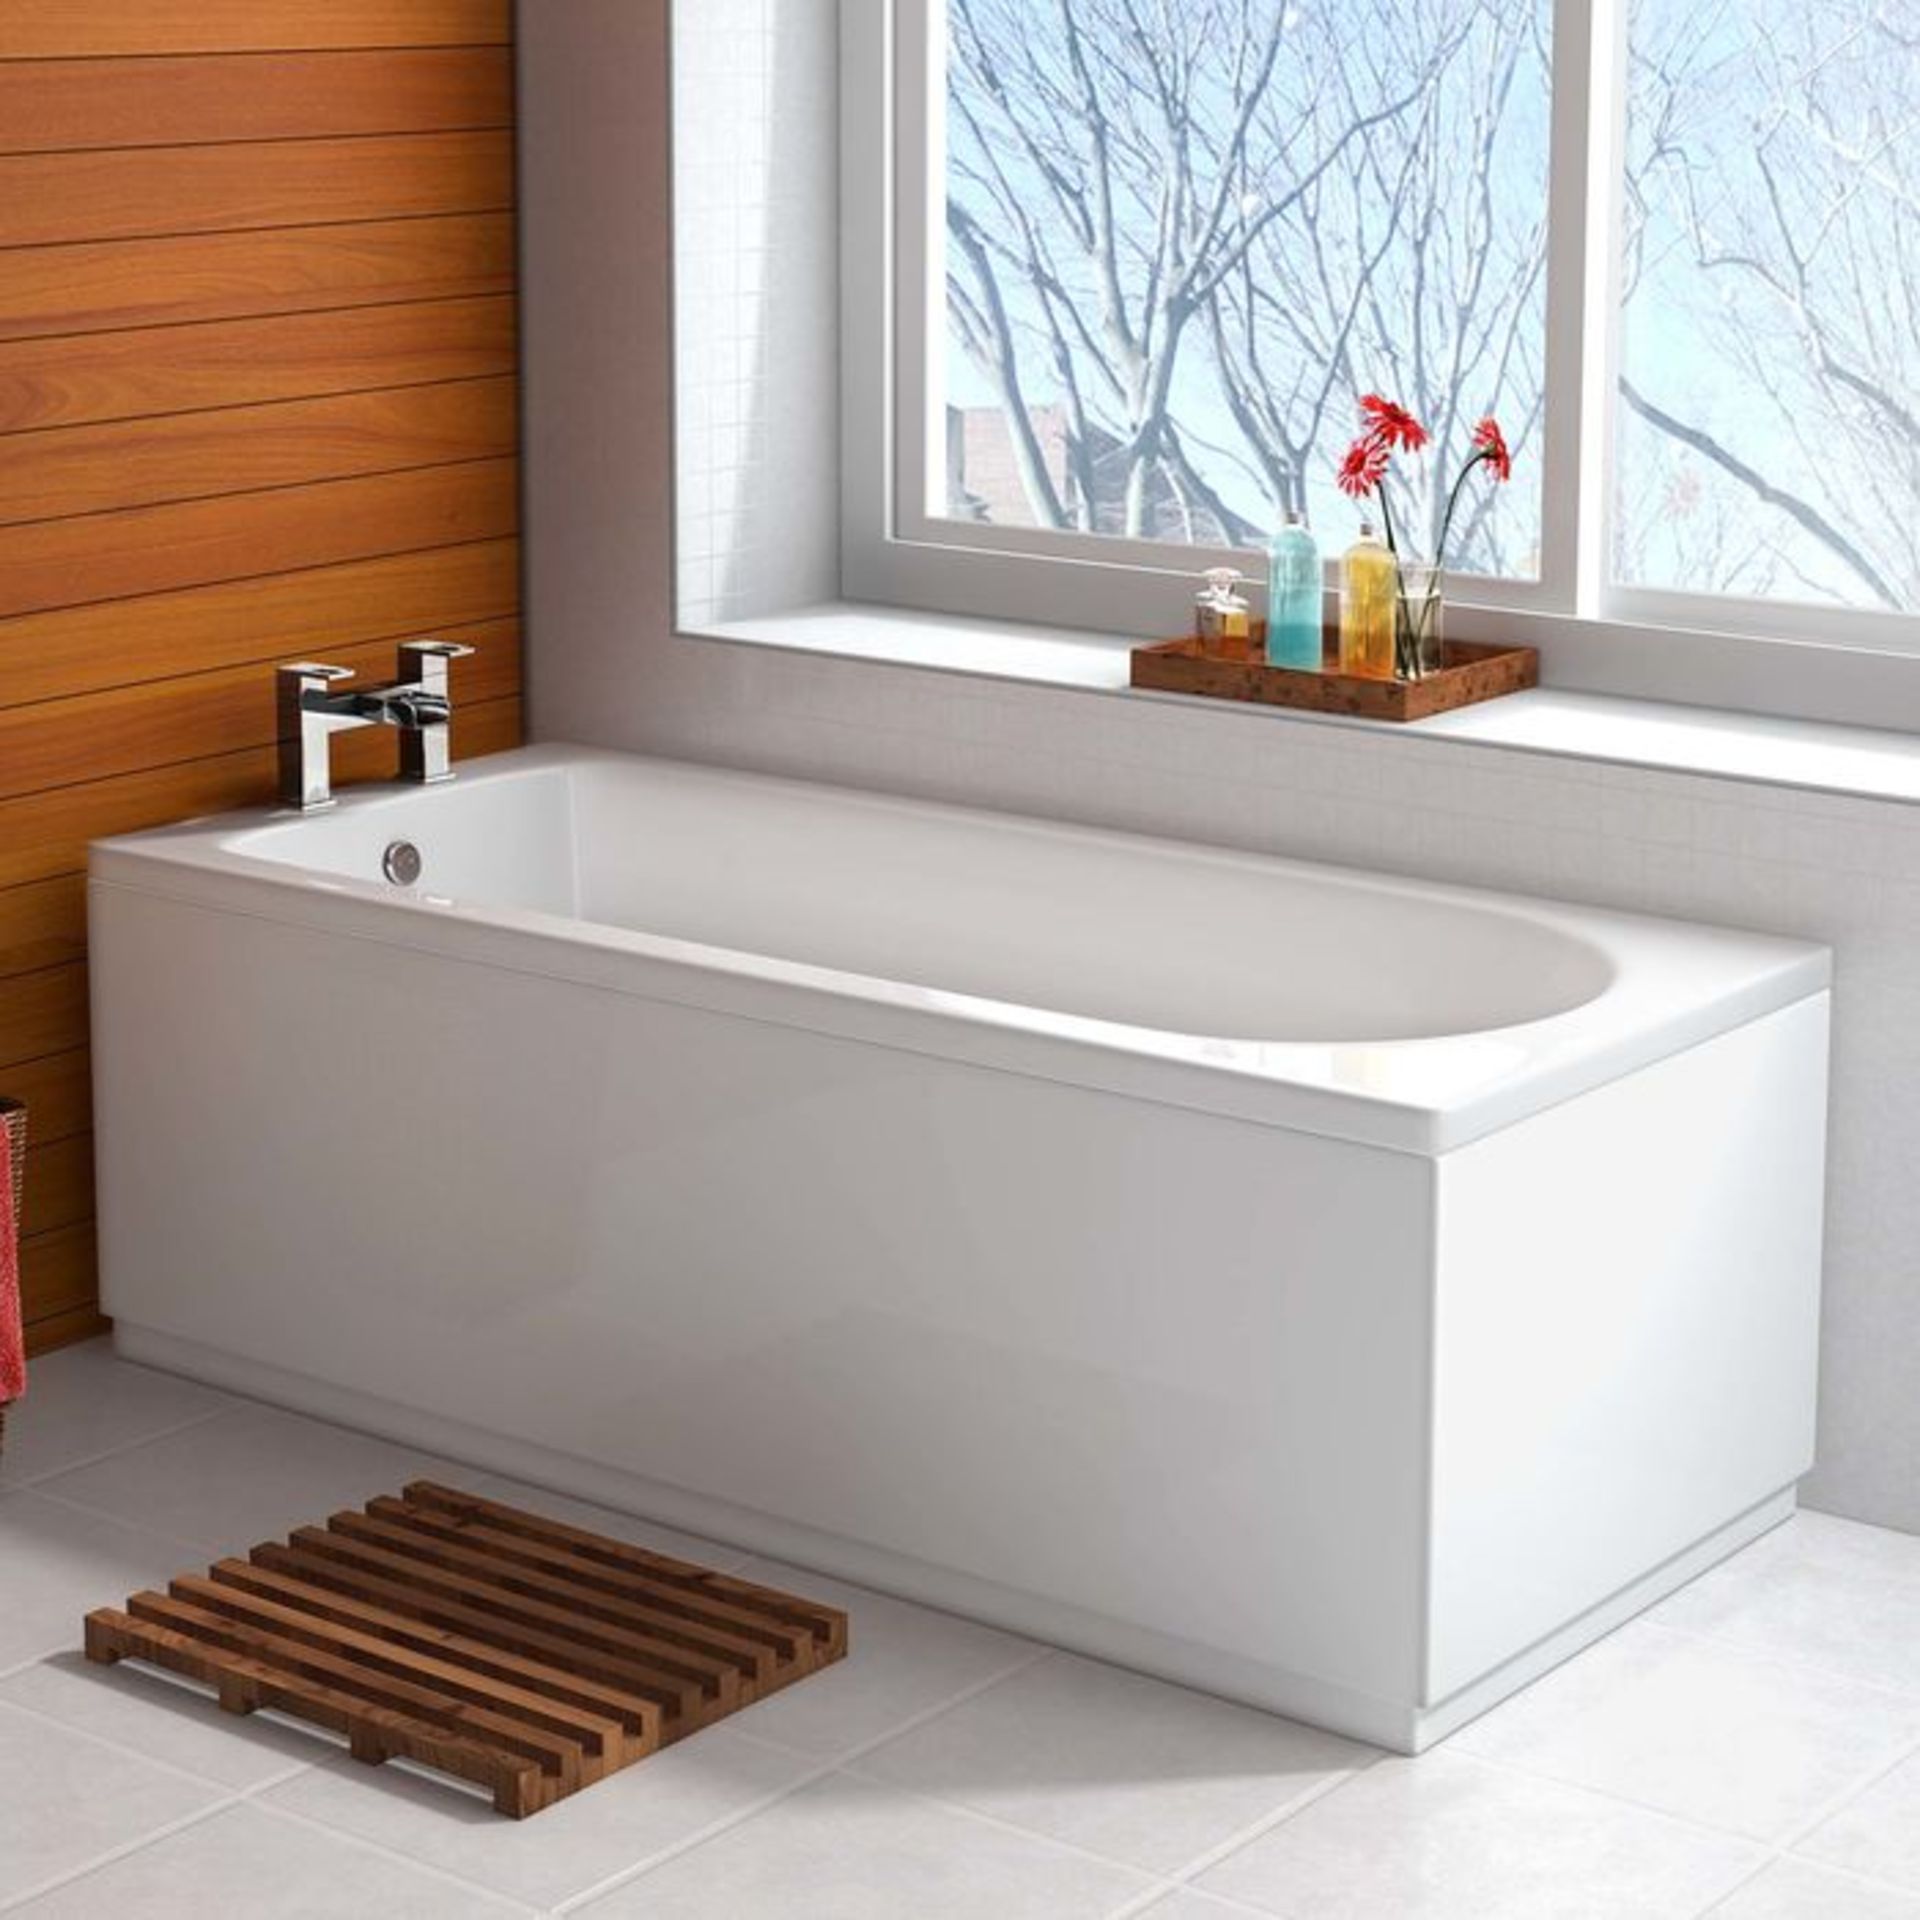 (KL131) 1500 x 700mm Round Single Ended Bath. RRP £332.99. Comes complete with side and end panel.